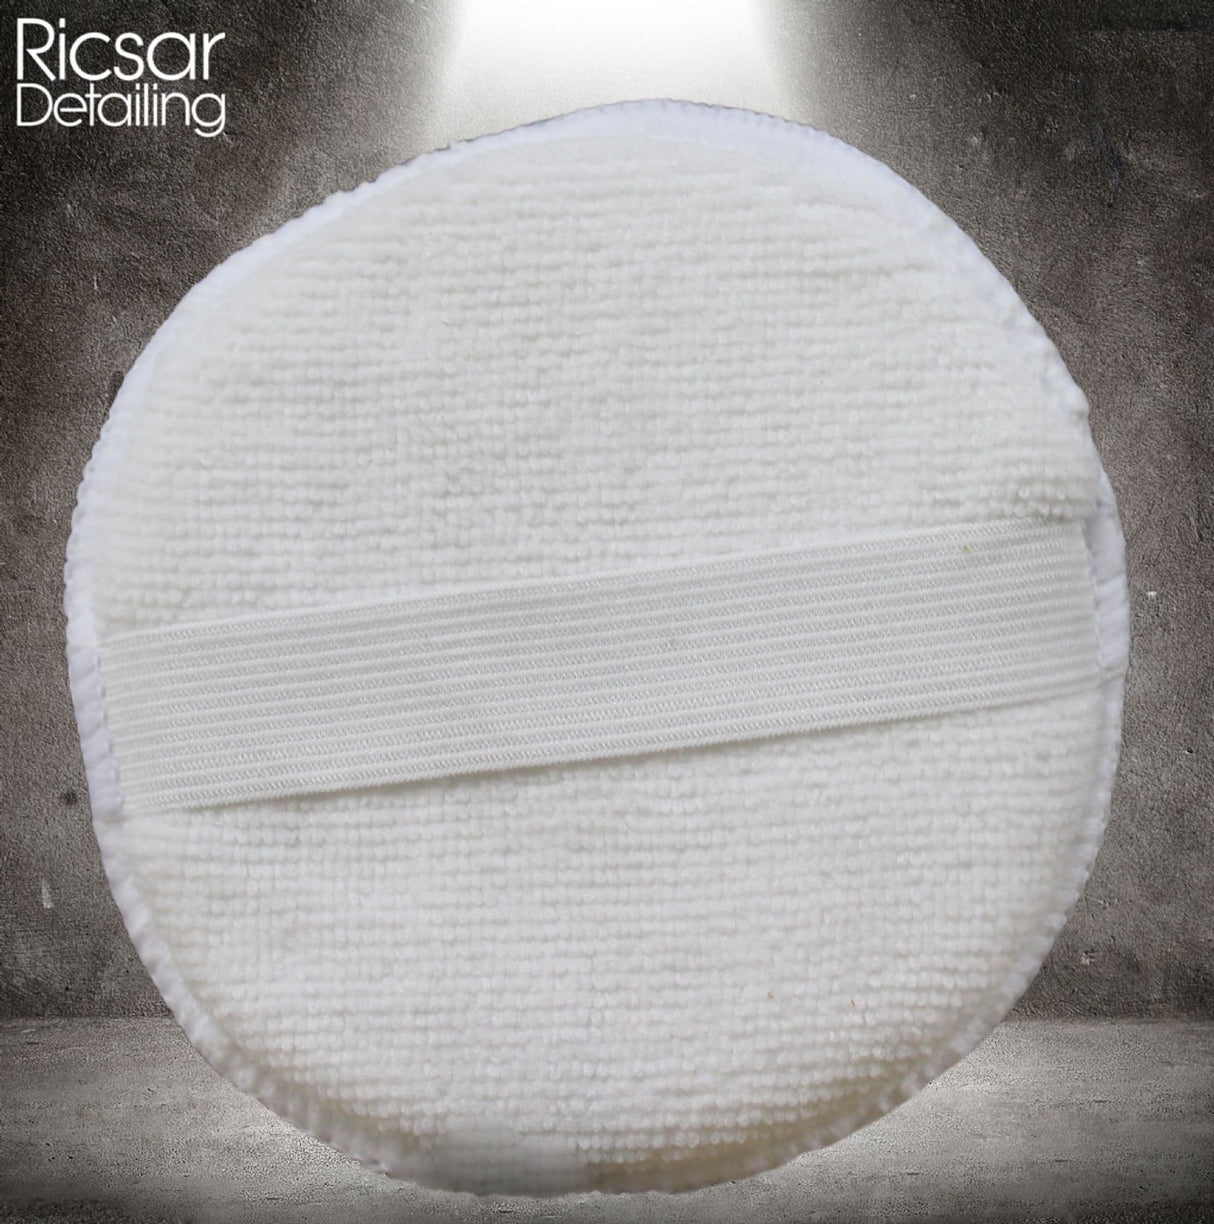 DETAIL GEAR Extra Large 4.5 inch Ultra Soft Microfibre Applicator Pad